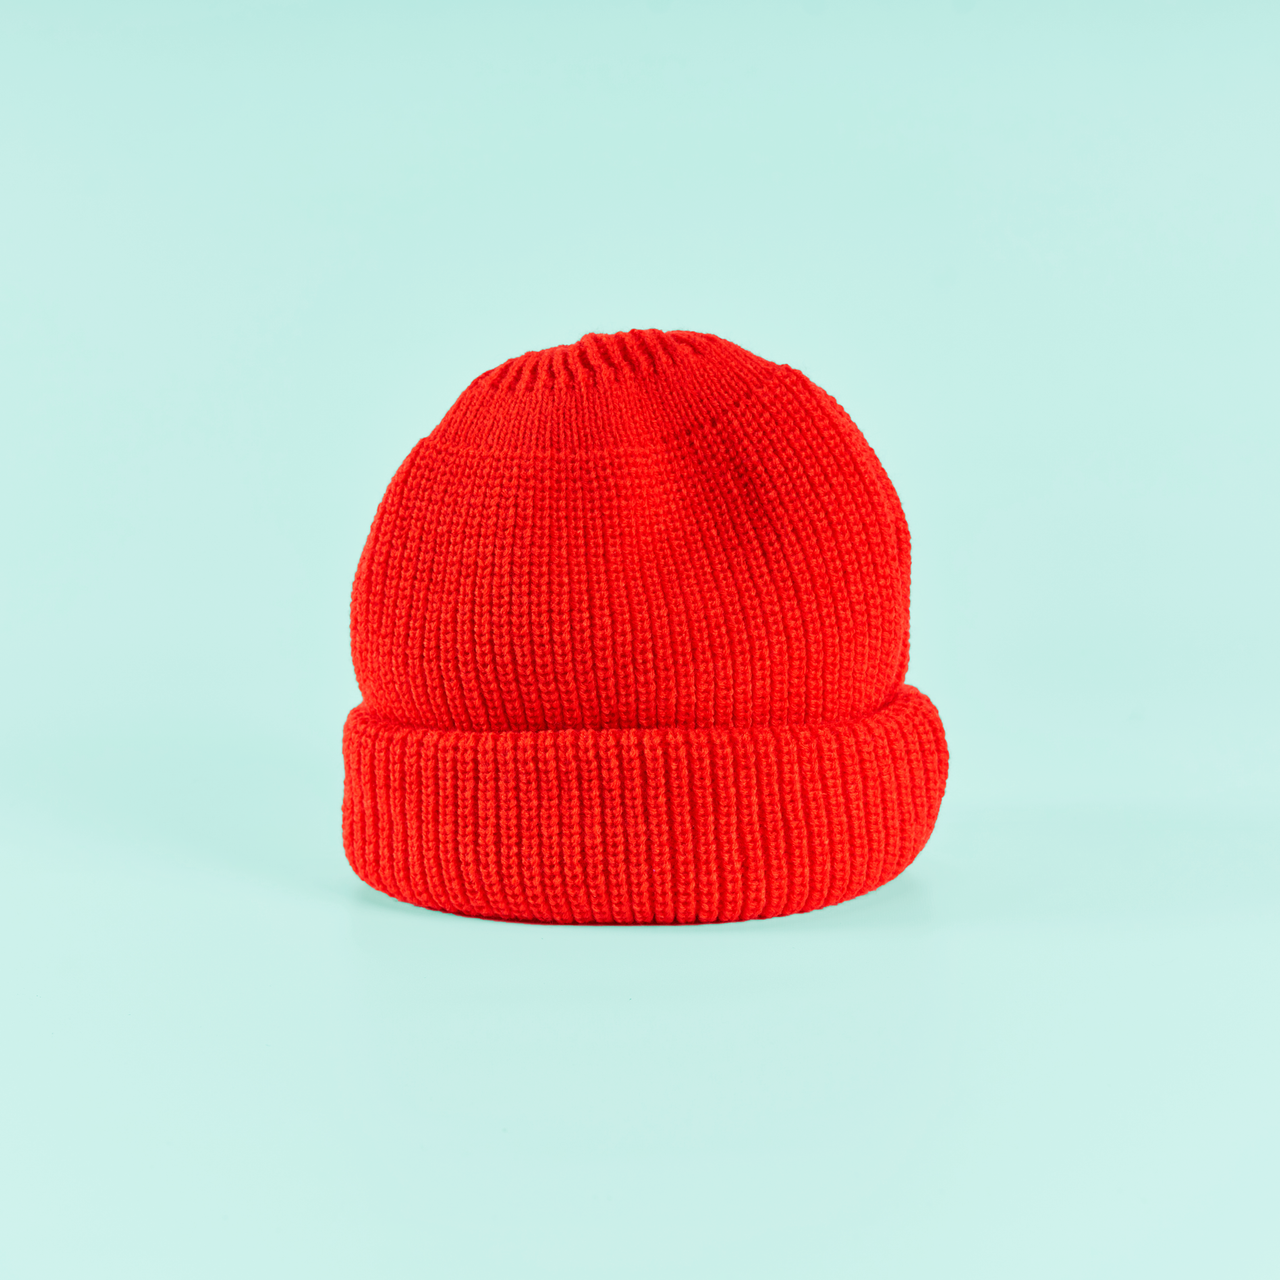 Lay Day Beanie - Red Rocket